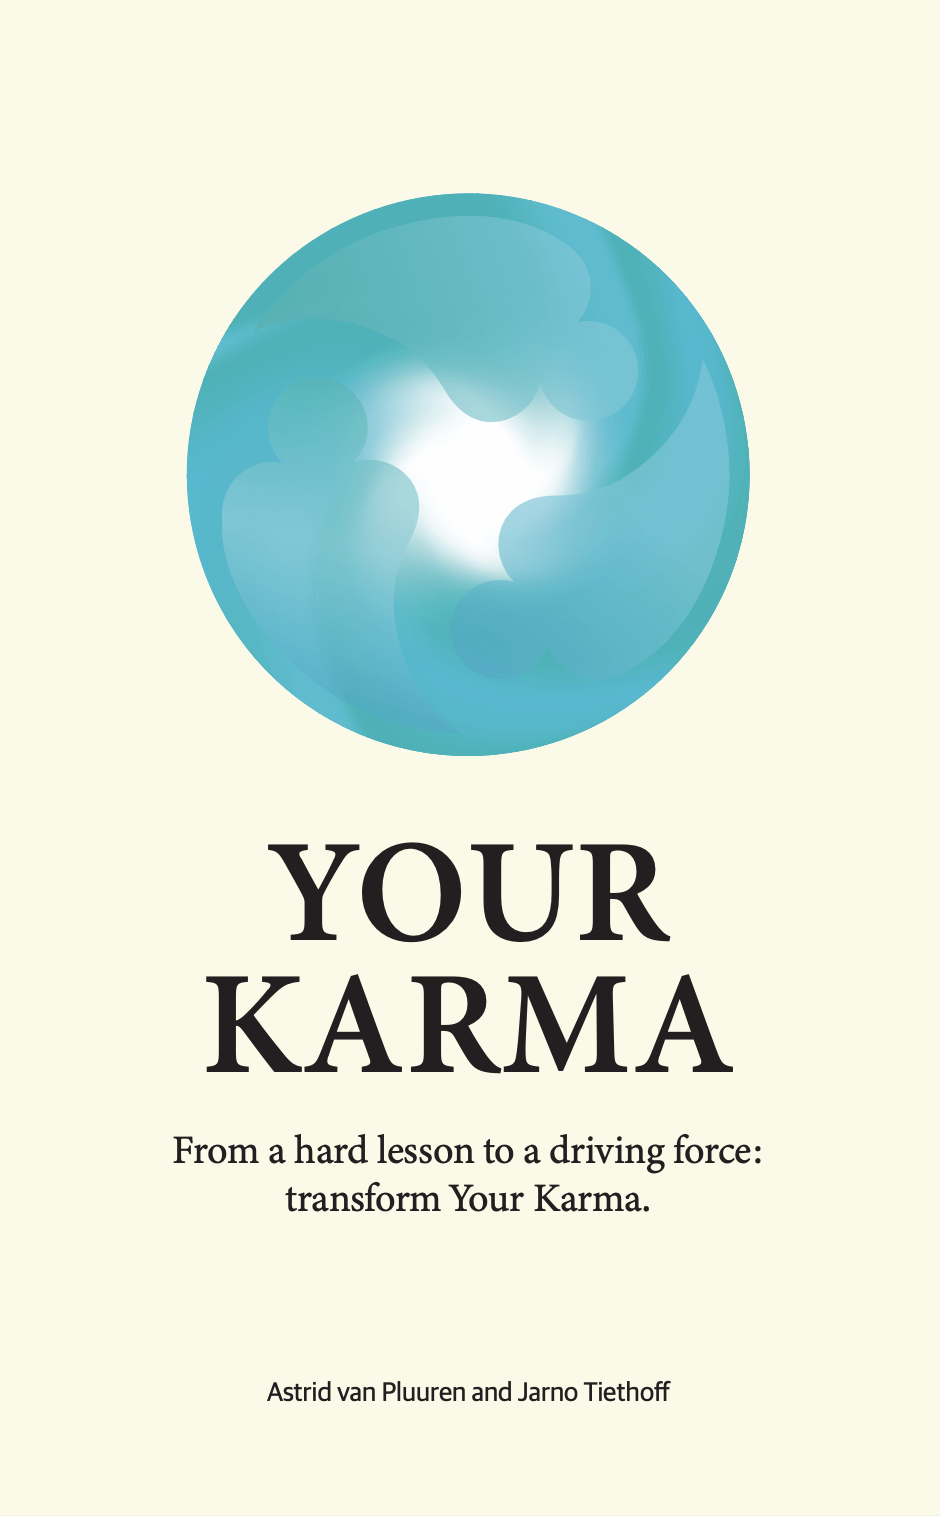 Your Karma | From a hard lesson to a driving force: transform Your Karma. Spiritual book by Astrid van Pluuren and Jarno Tiethoff